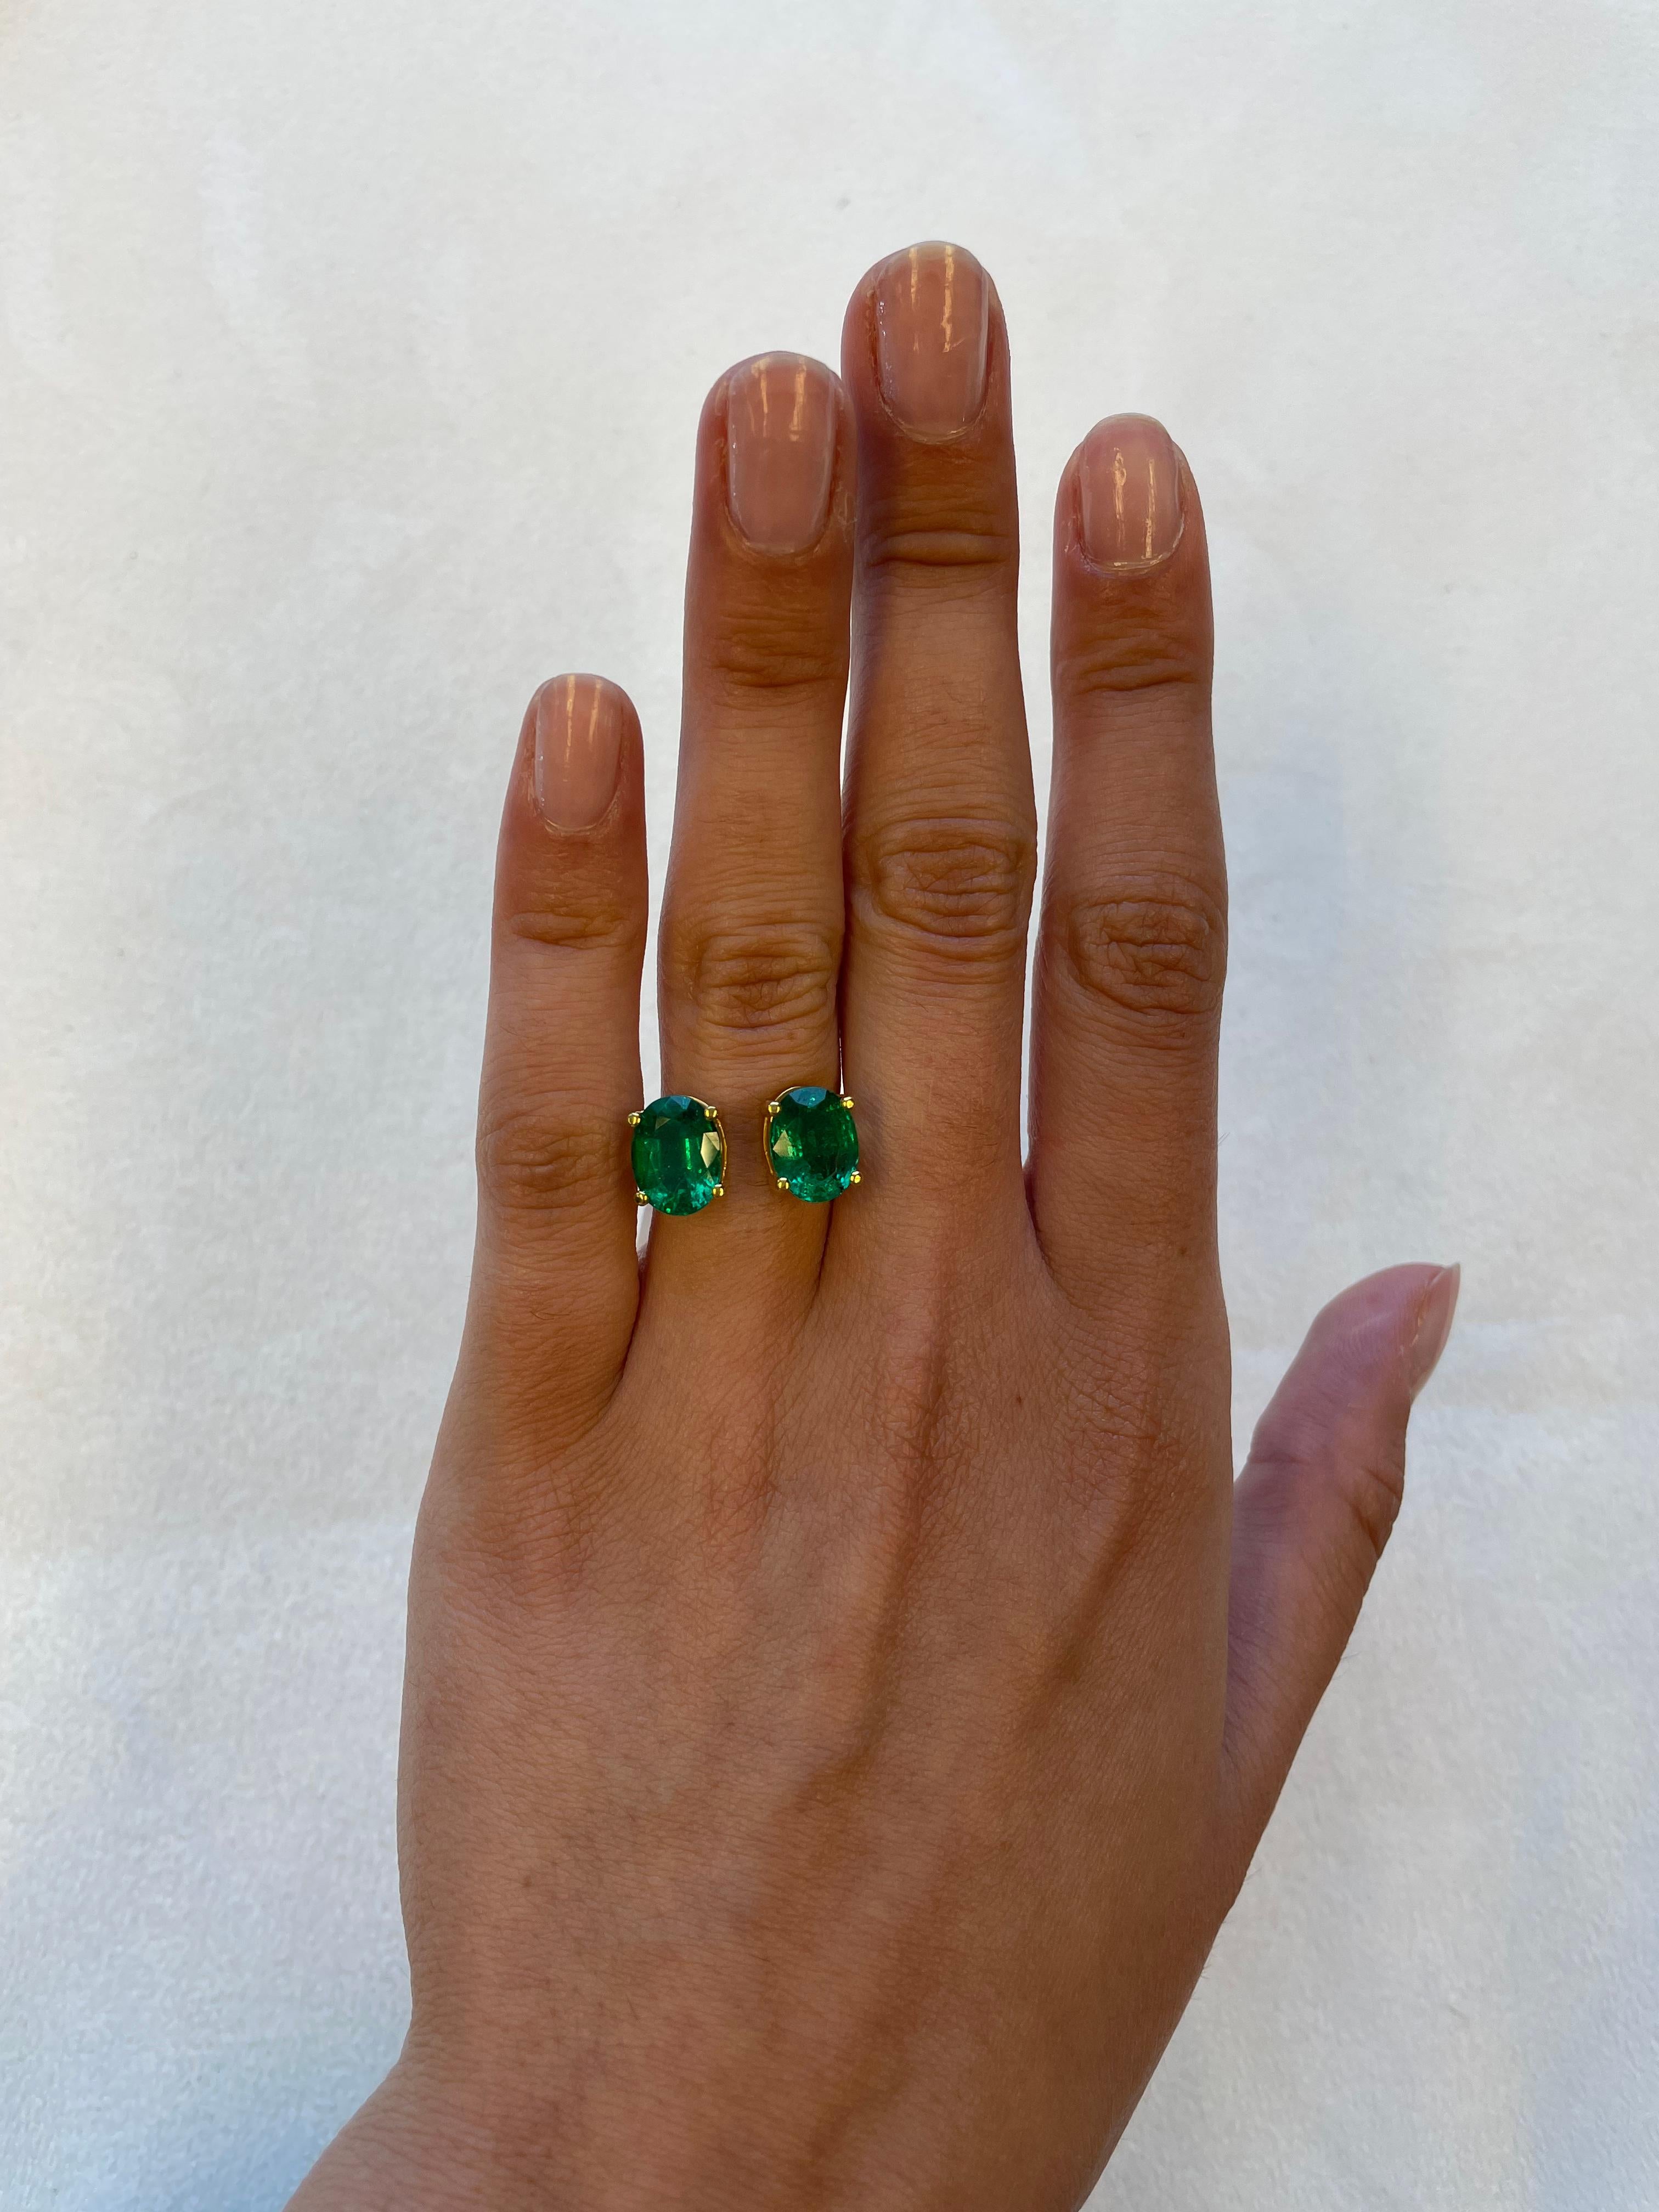 Stunning modern floating emerald and diamond toi et moi ring. By Alexander Beverly Hills.
2 oval emeralds, 4.60 carats apx F2. 18-karat yellow gold, 5.54 grams, current ring size 6.5.
Accommodated with an up-to-date appraisal by a GIA G.G. once